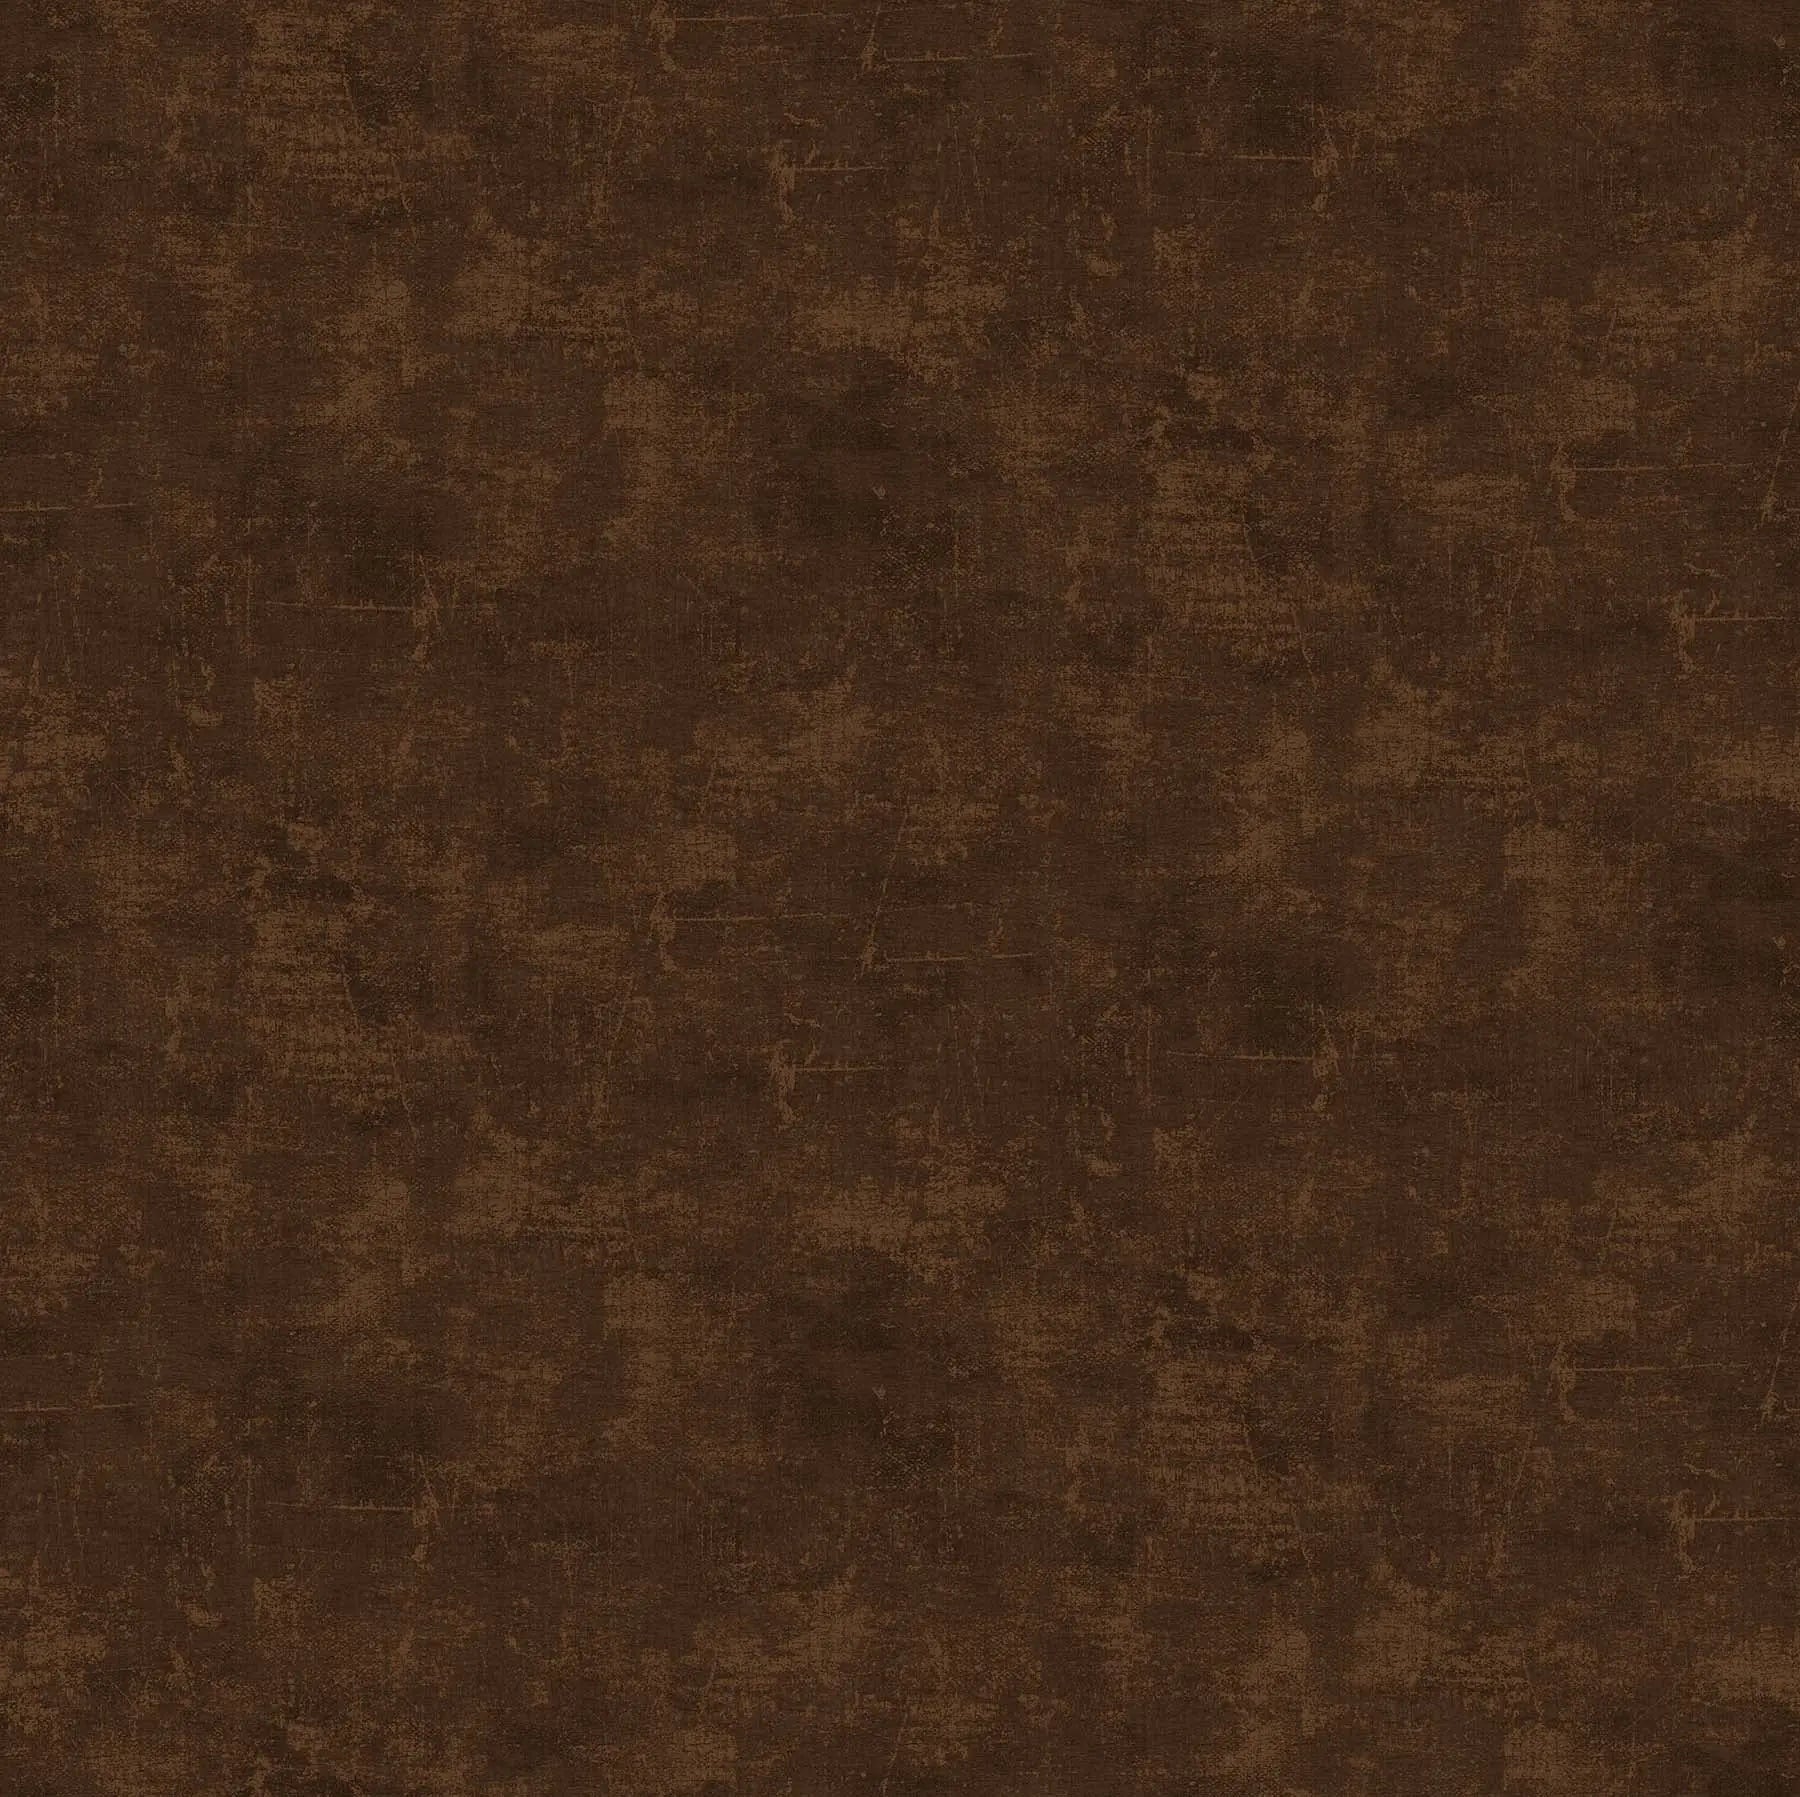 Brown Coffee Bean Canvas 45" Flannel Cotton Fabric per yard - Linda's Electric Quilters